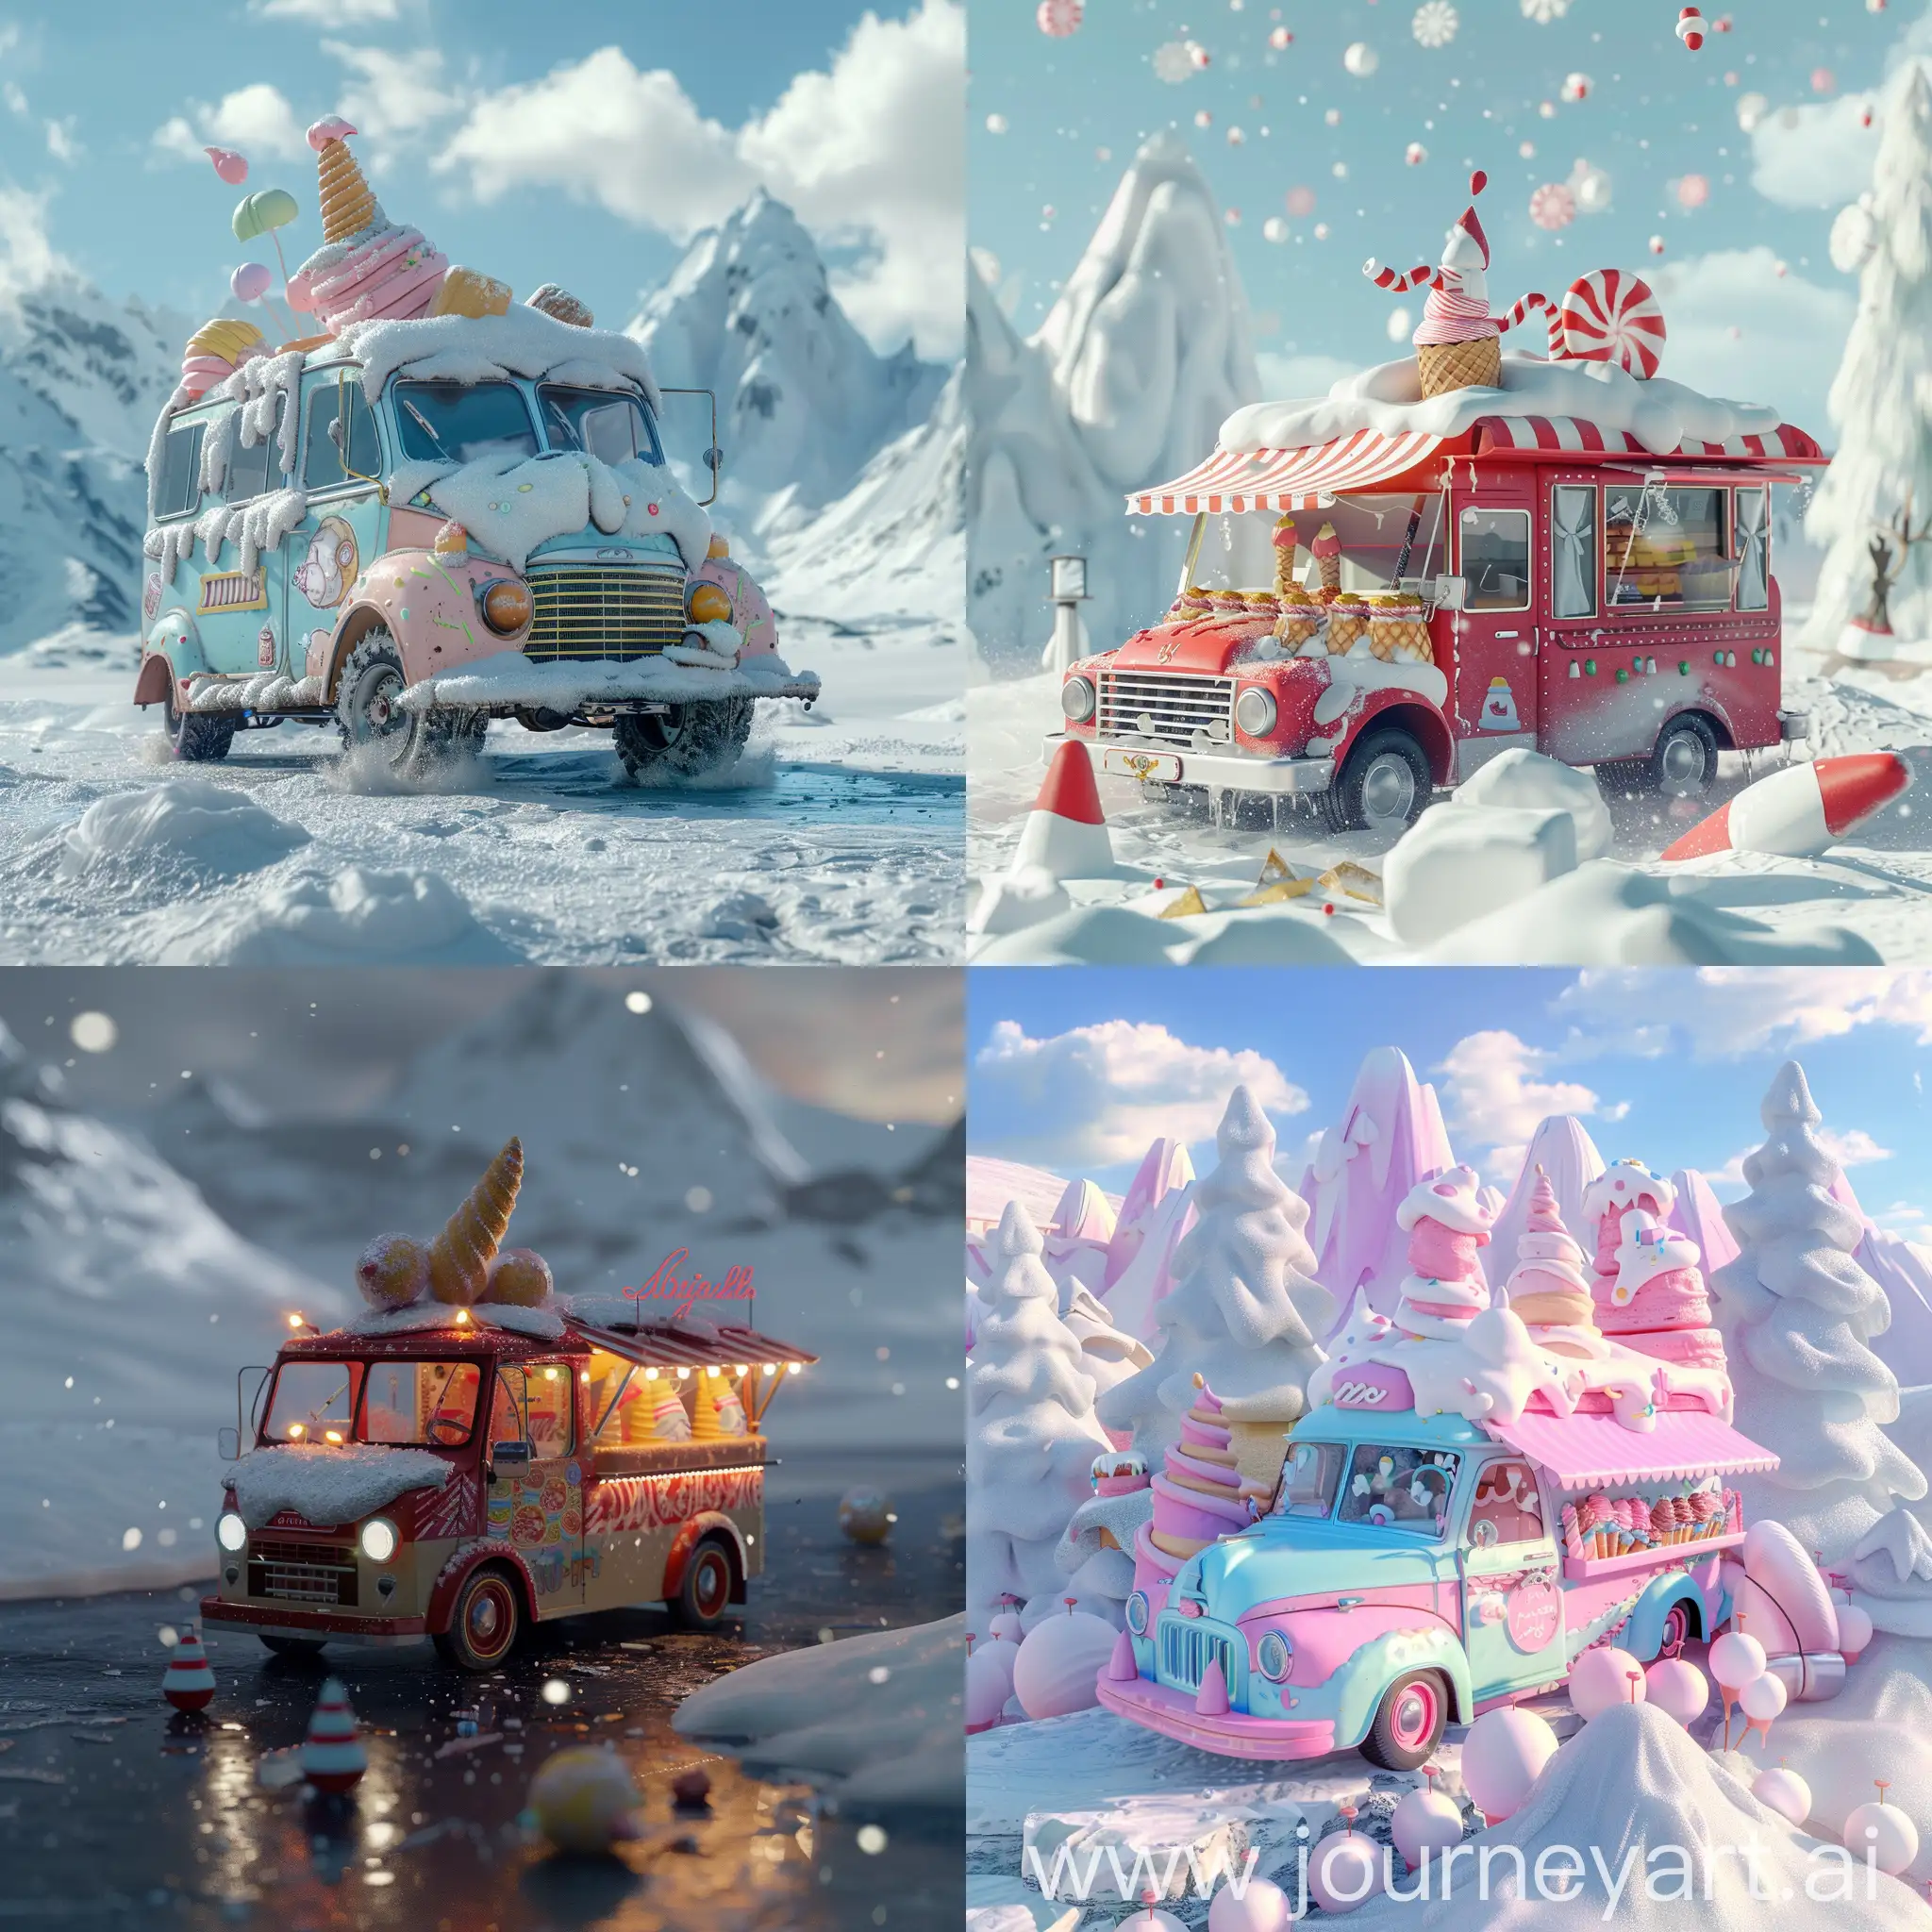 Delicious-Ice-Cream-Truck-Adventures-at-the-North-Pole